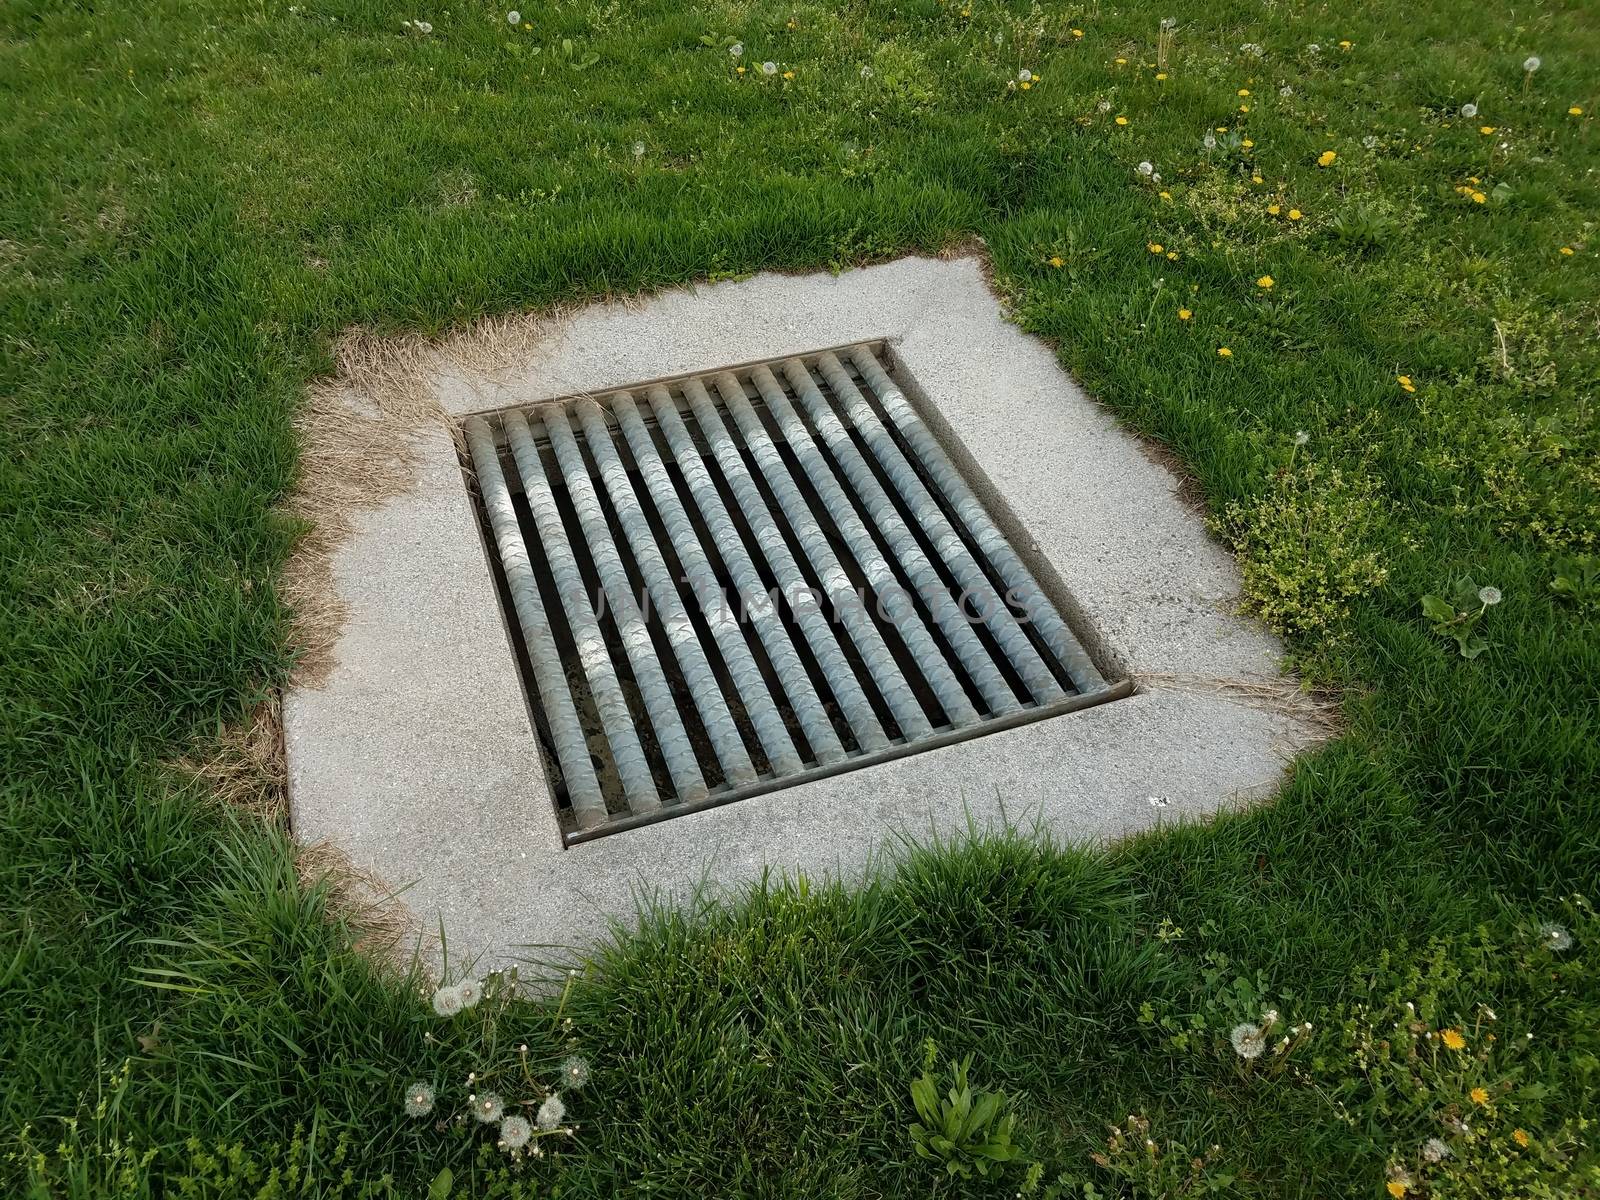 drain with metal grate bars and green grass by stockphotofan1